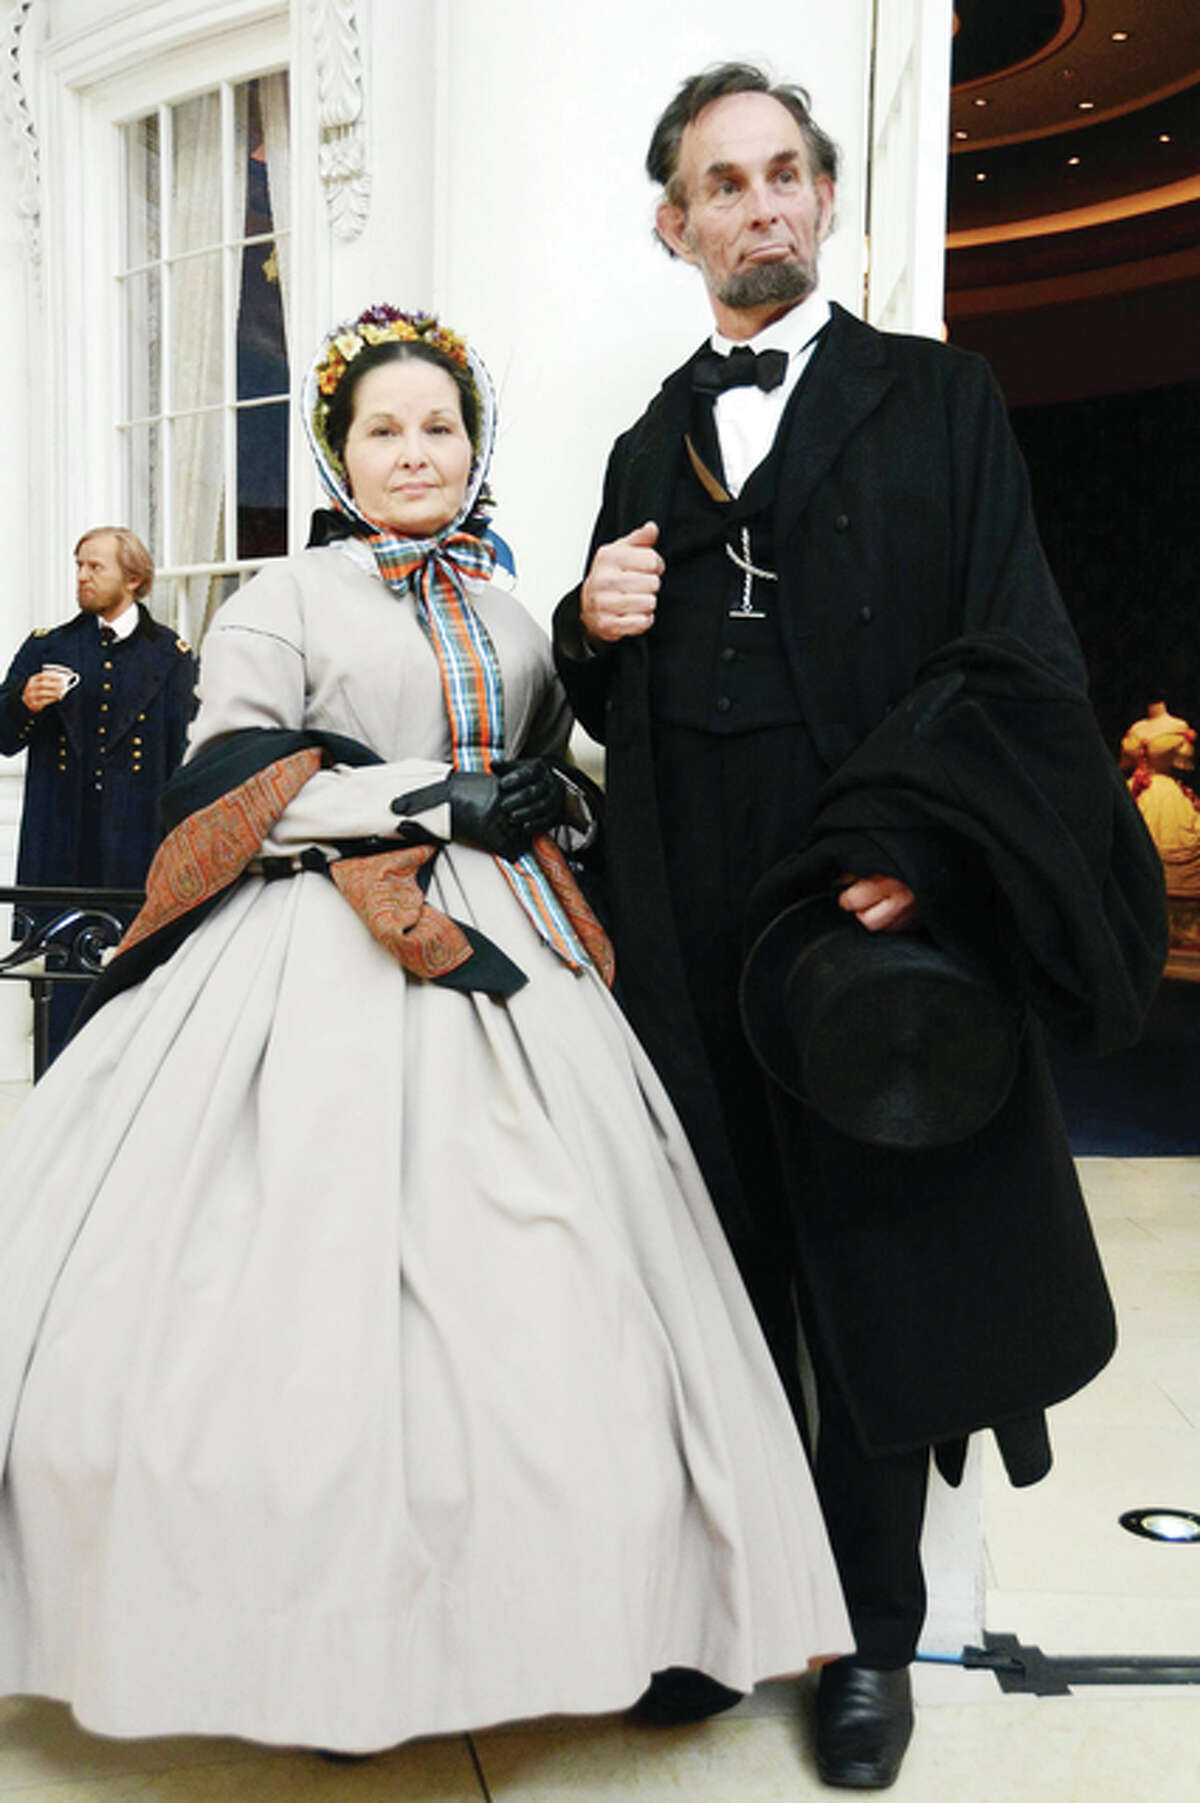 mary todd lincoln costume